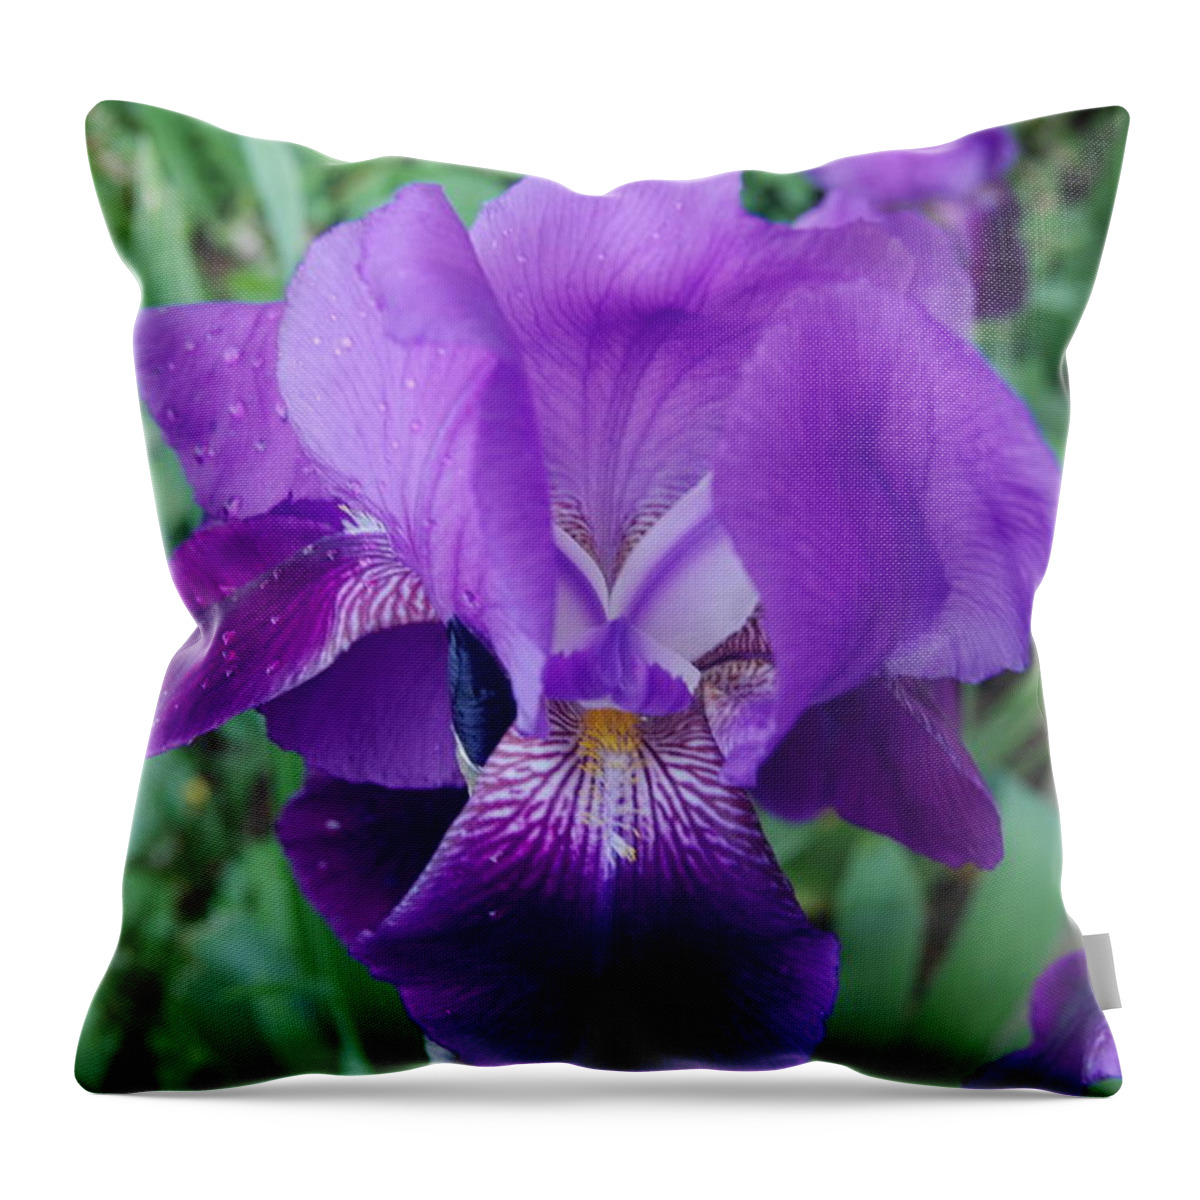 Flowers Throw Pillow featuring the photograph The Purple Iris Flower by Ee Photography